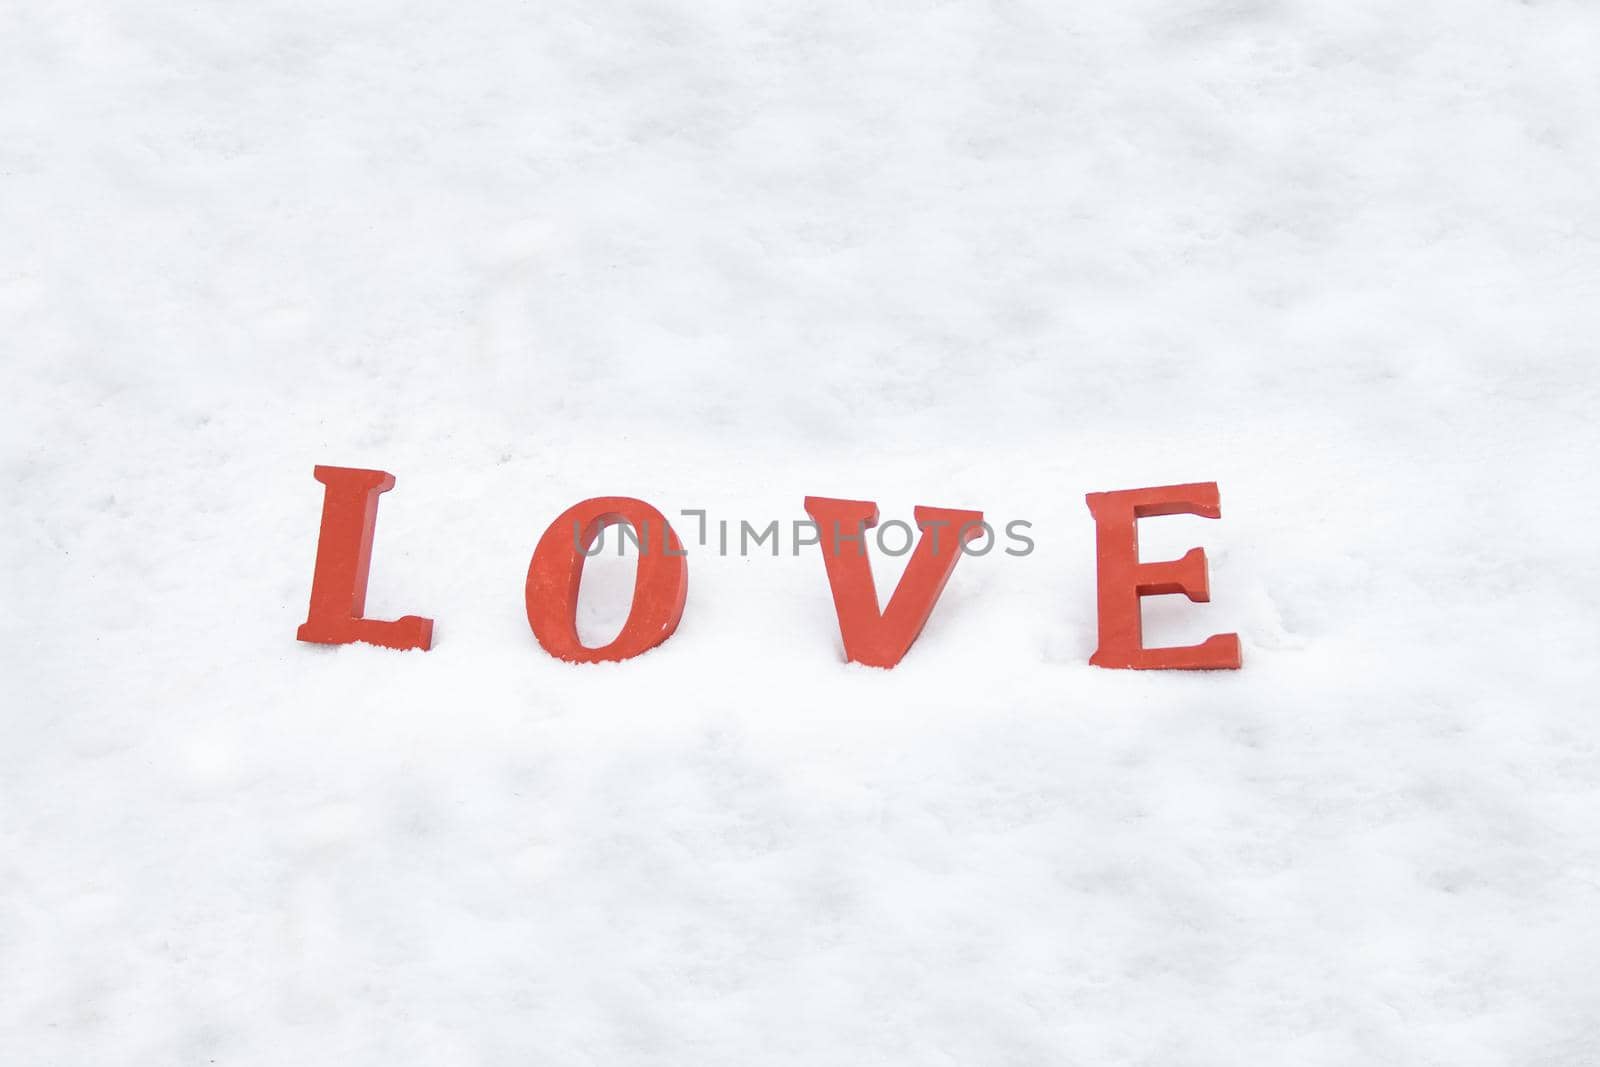 red love letters on white snow. word love on white background about-valentine friends or lovers day. word love letters on white snow, background about love, day of lovers. Valentines day